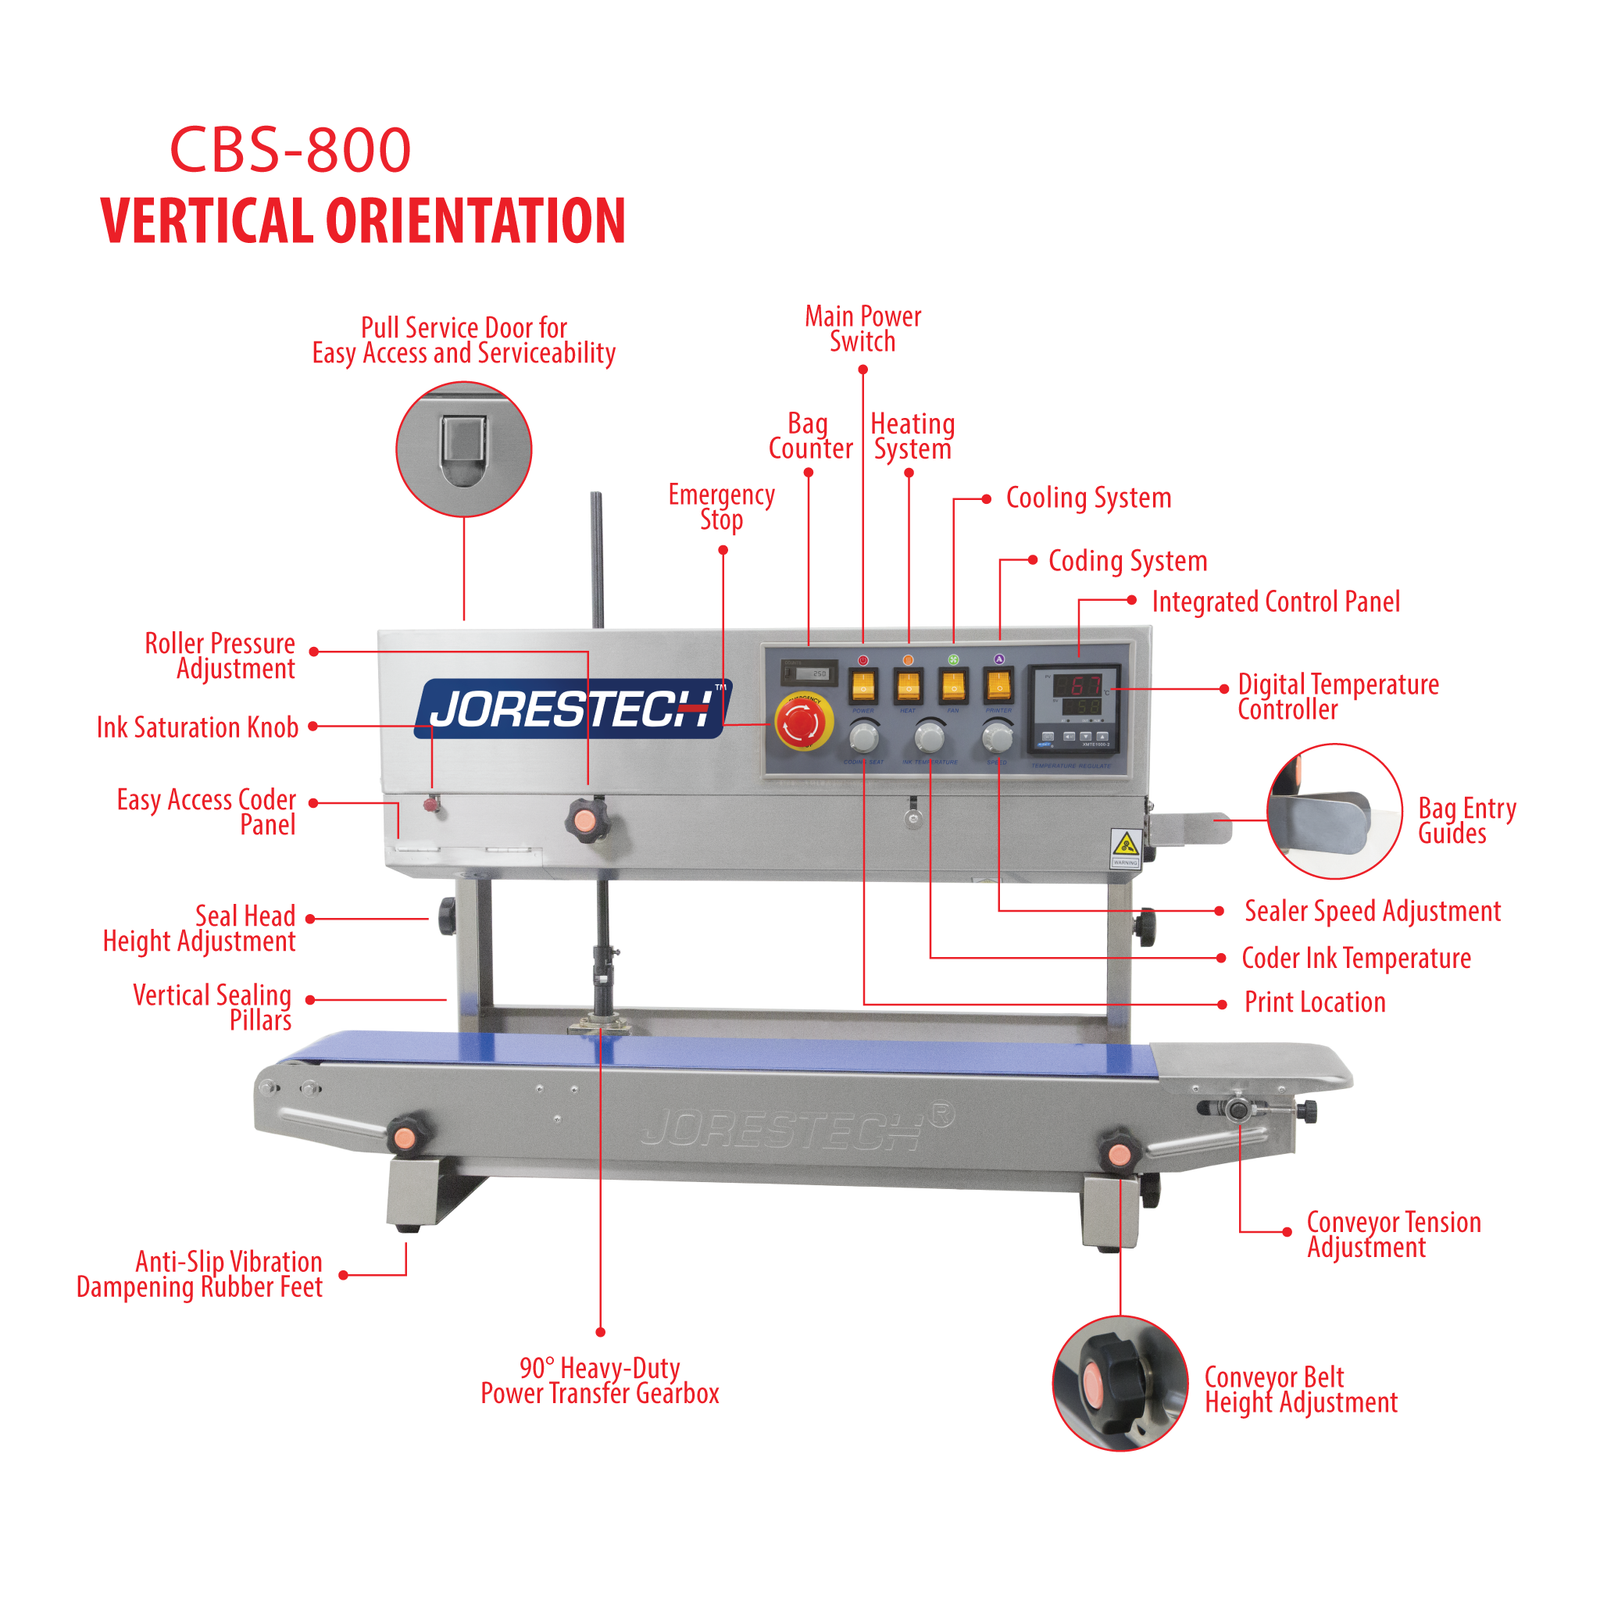 Features of the 220v stainless steel digital continuous band sealer with coder set for vertical applications